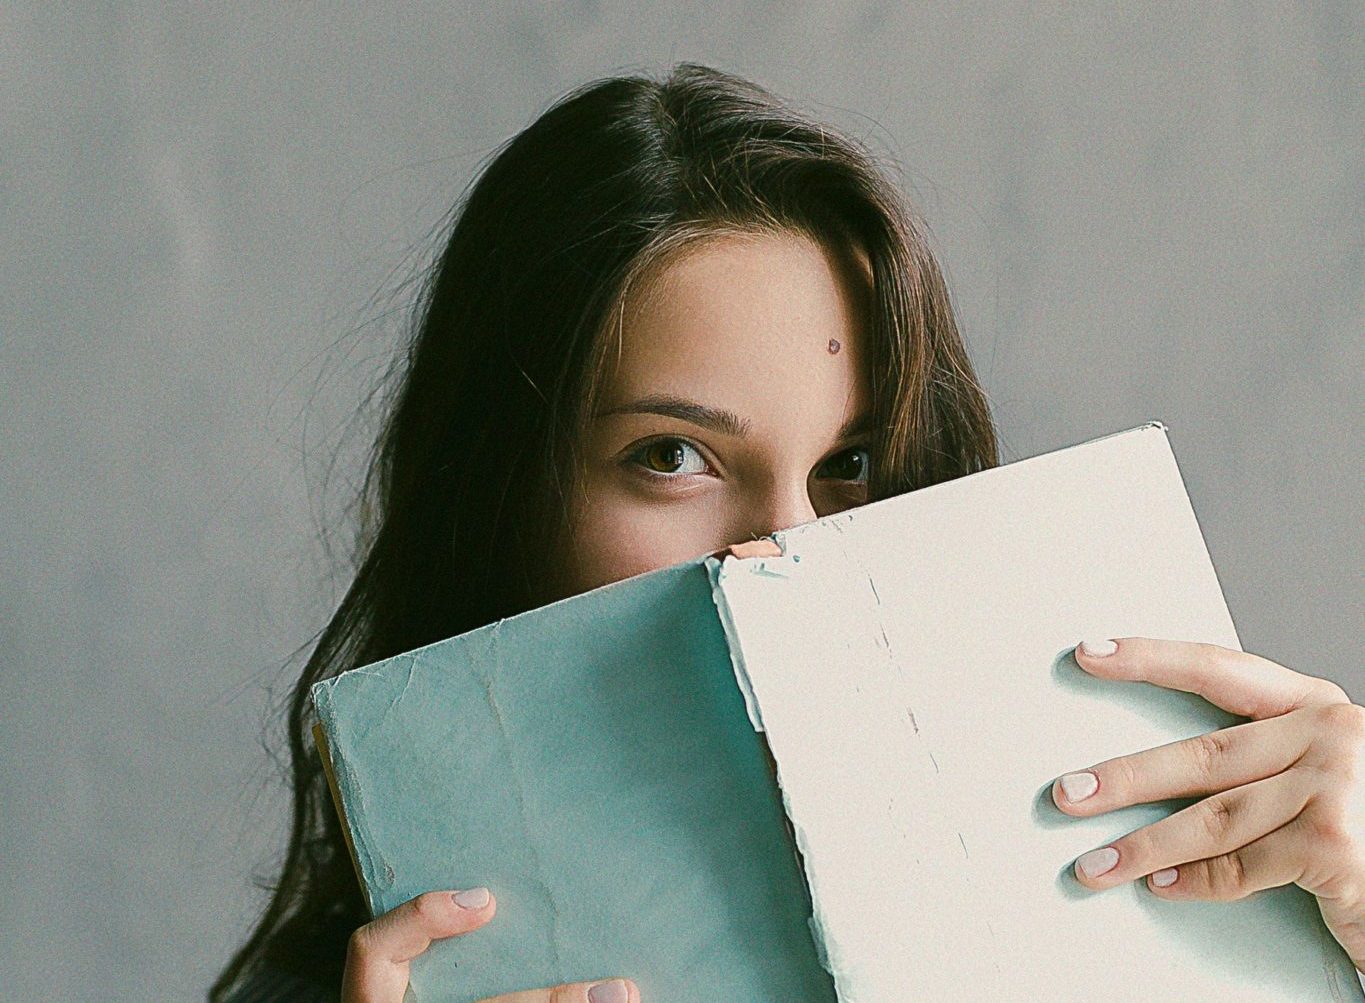 Shy woman hides half her face behind a pale blue book